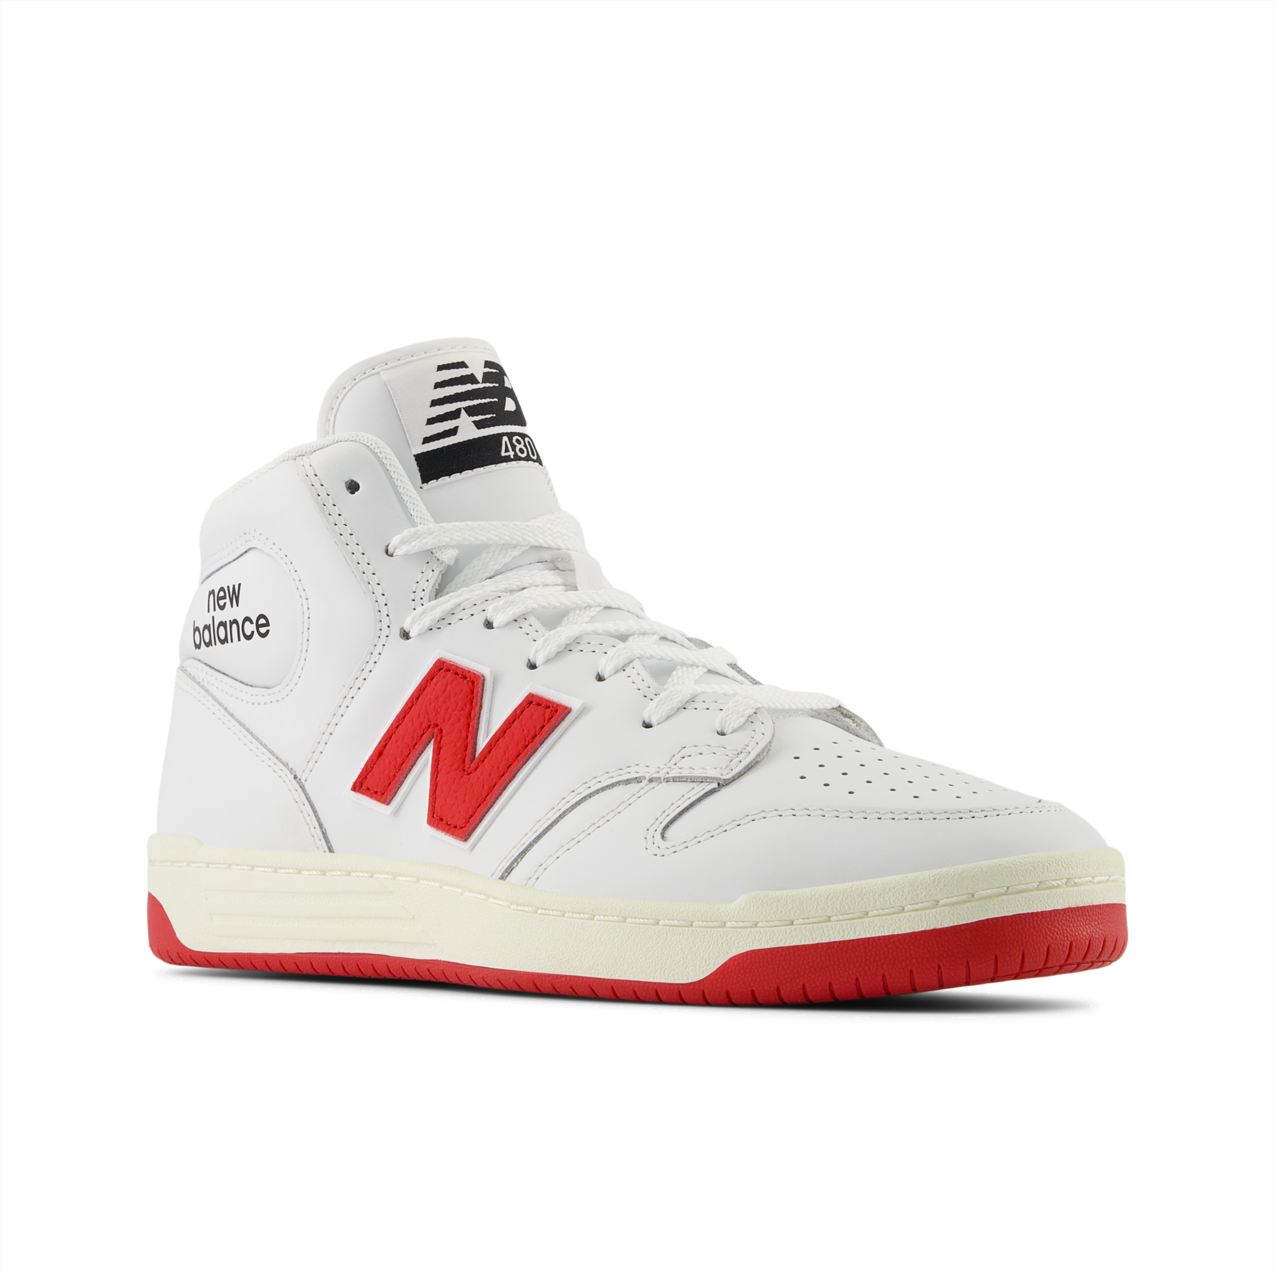 New Balance Numeric Men's 480 High White Red Shoes